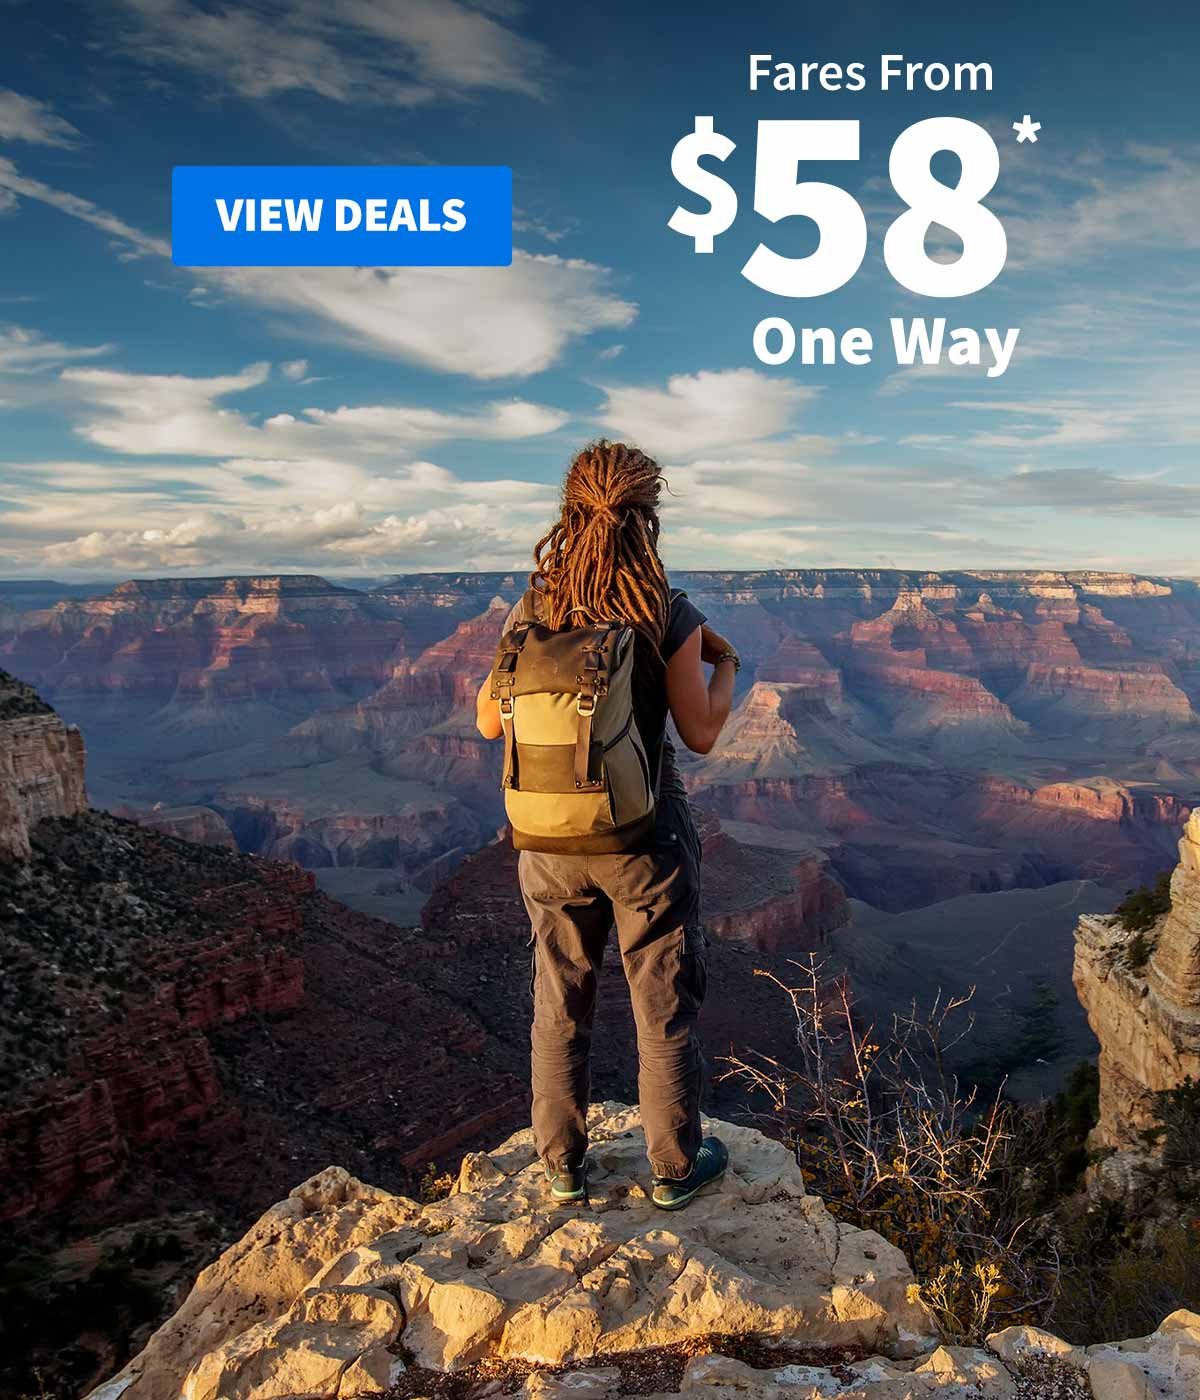 Fares From $58* One Way